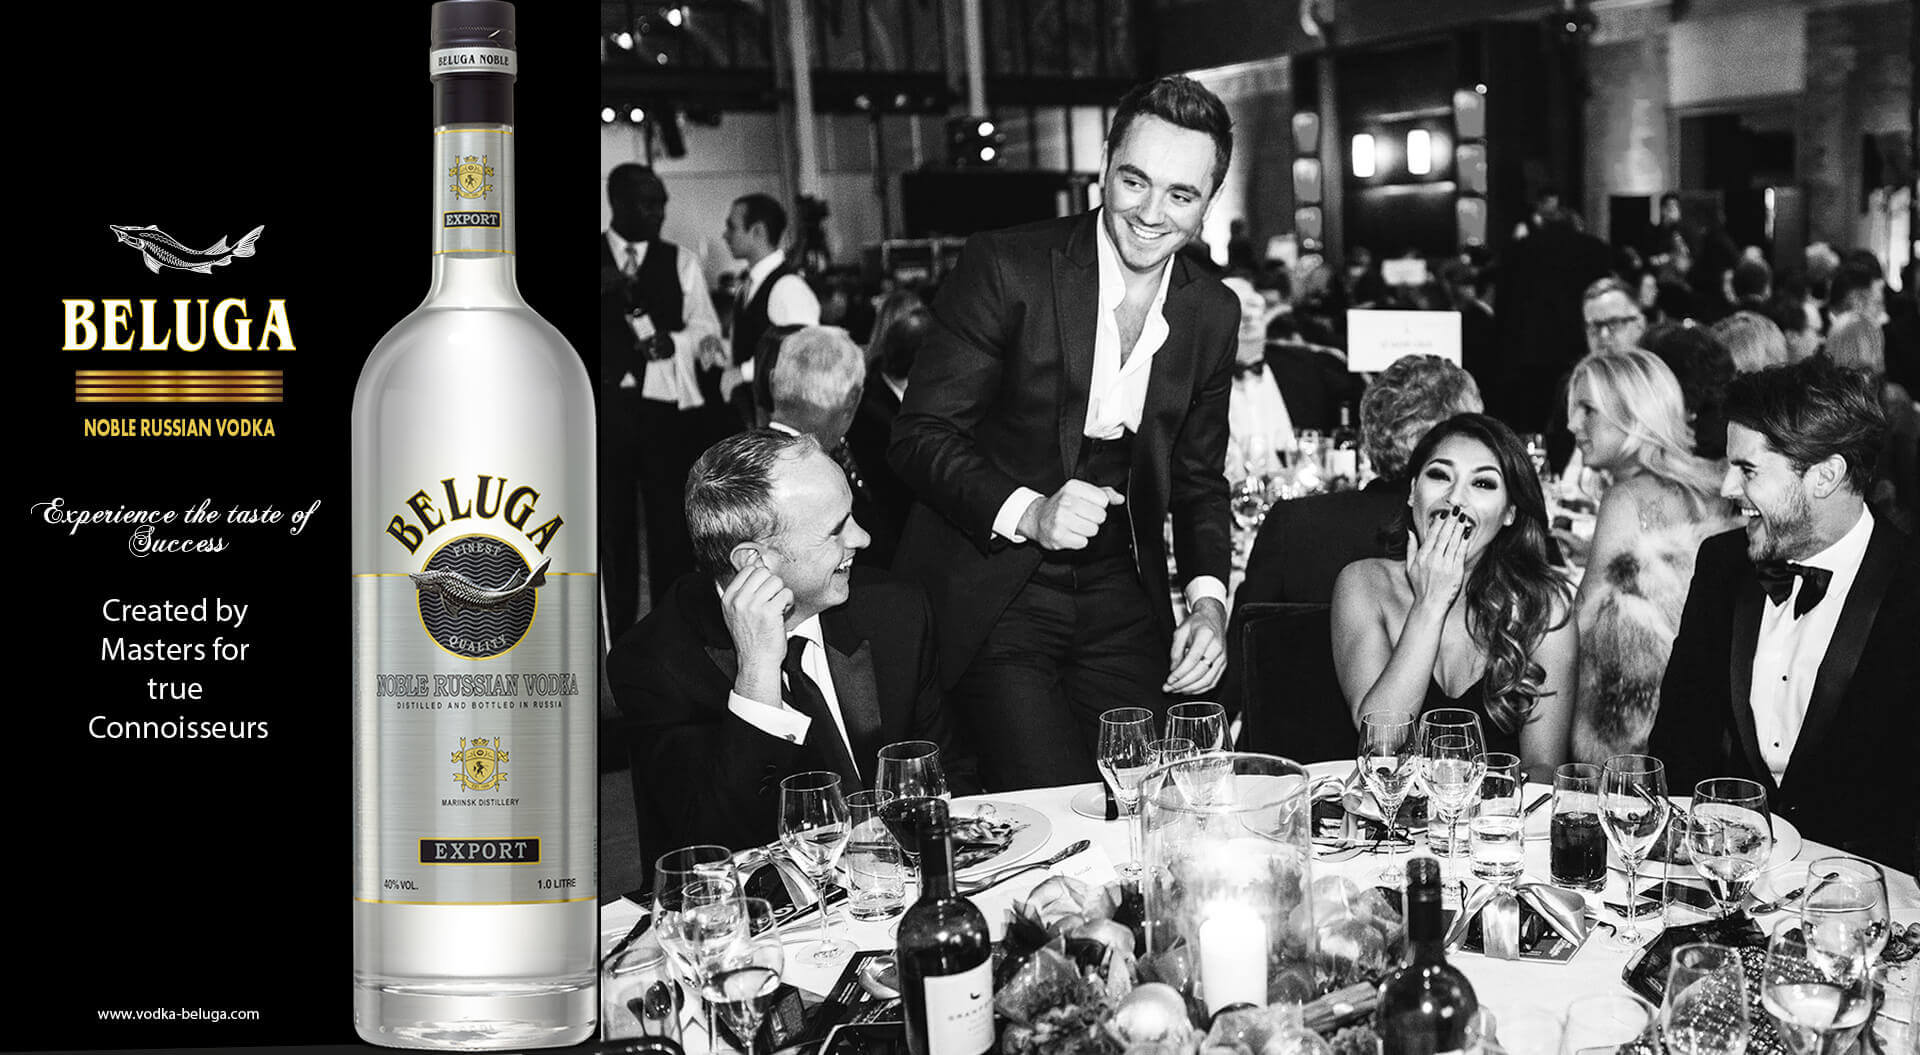 Beluga Vodka Russia, Specialist Drinks Marketing. A creative business connecting brands to audiences - CampbellRigg Agency